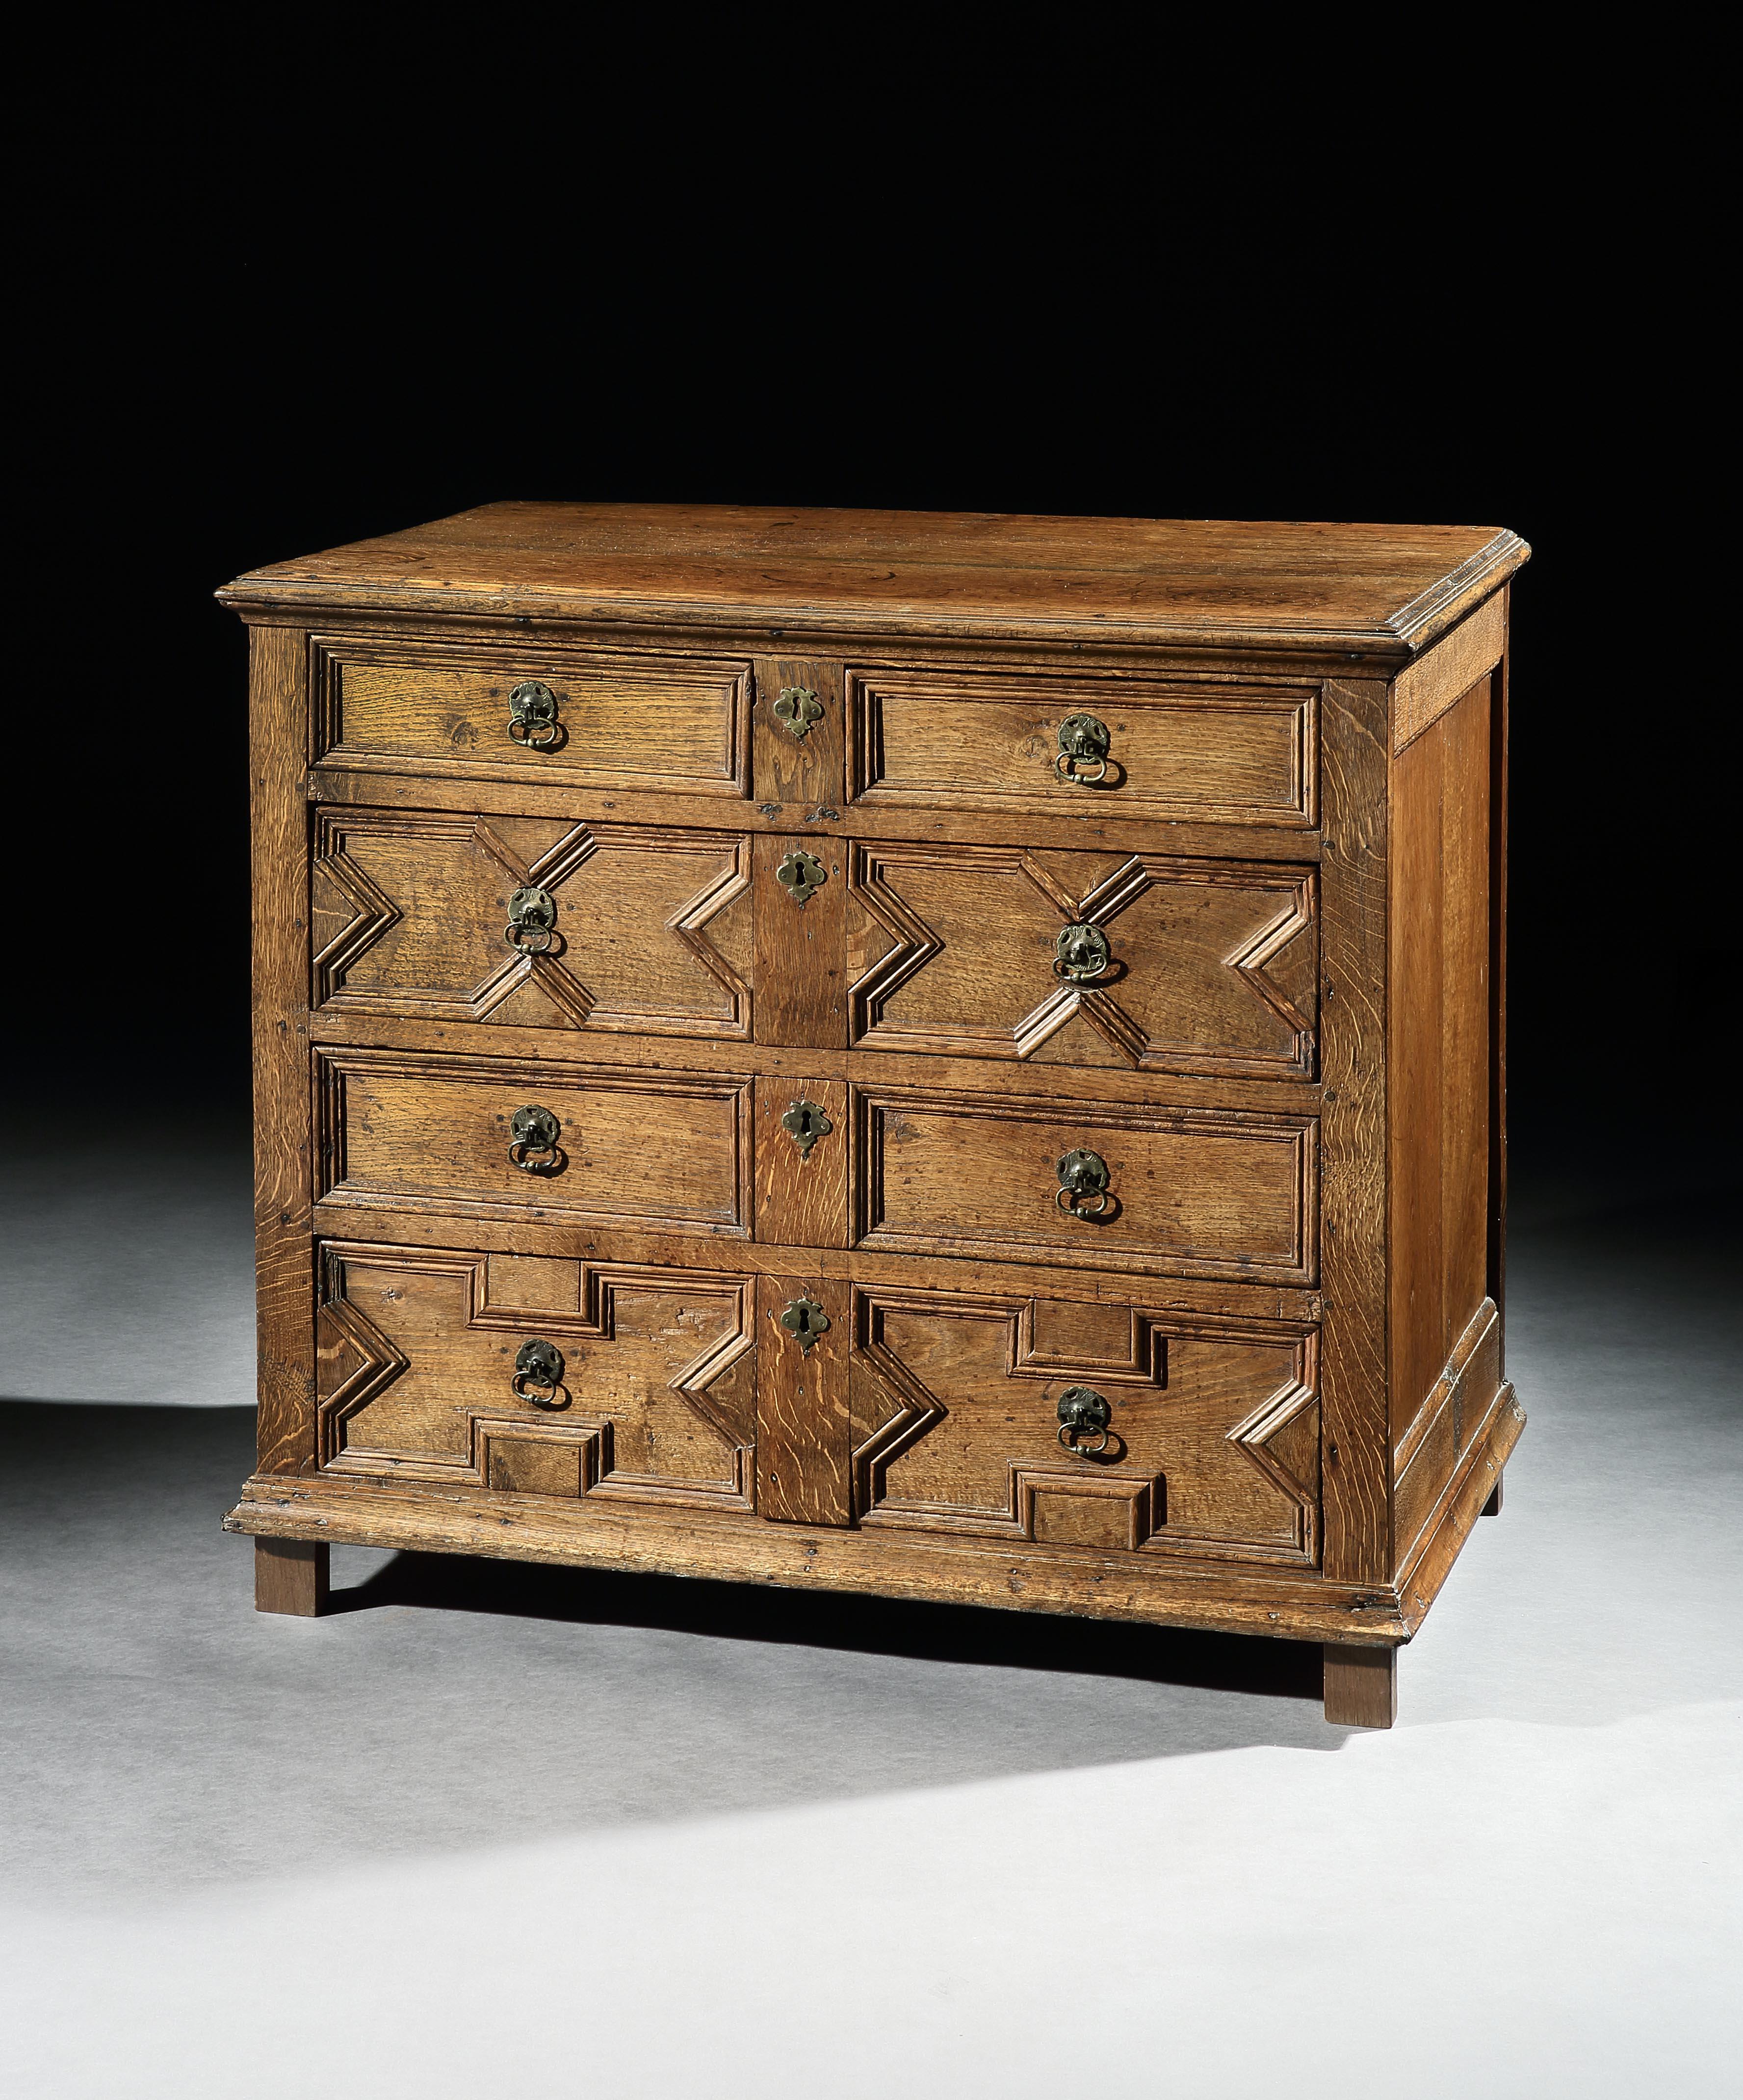 This chest of drawers has a lovely mellow color and patina. The carpenter has selected oak with fine medullary rays so that the figuring which is particularly evident on the top, down the sides and the middle of the front has become a charming